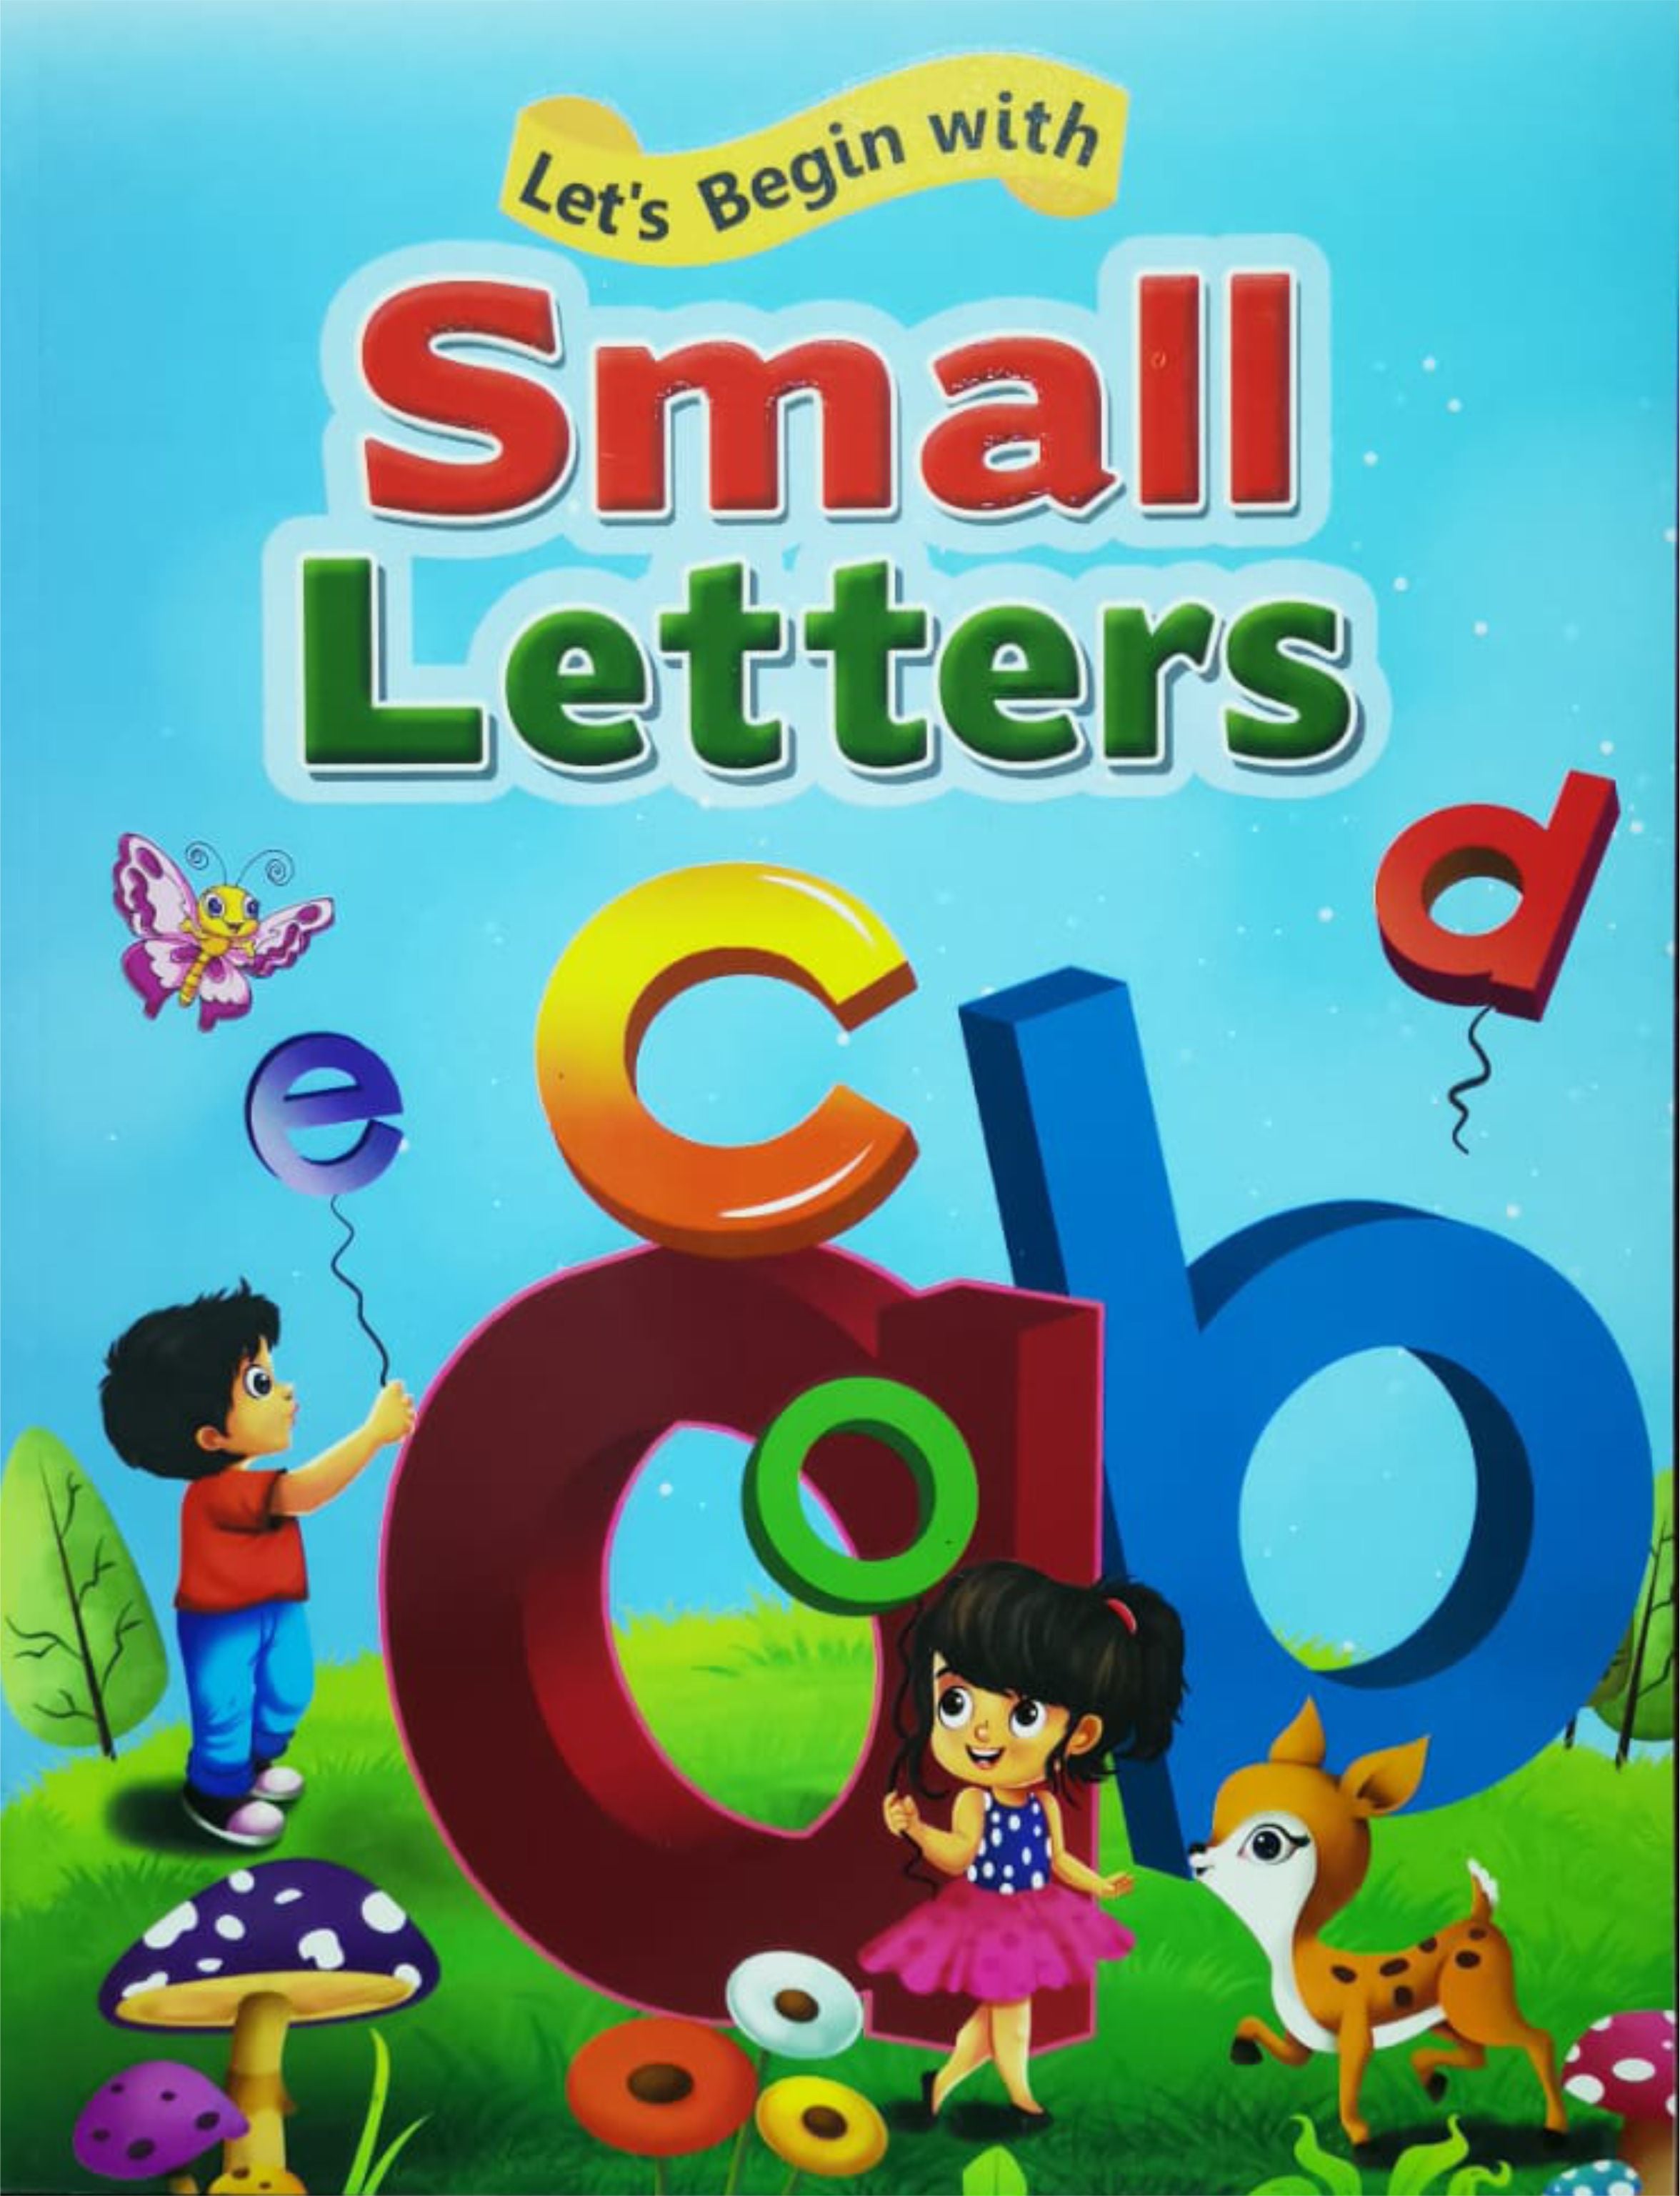 Let's Begin With Small Letters (abc)